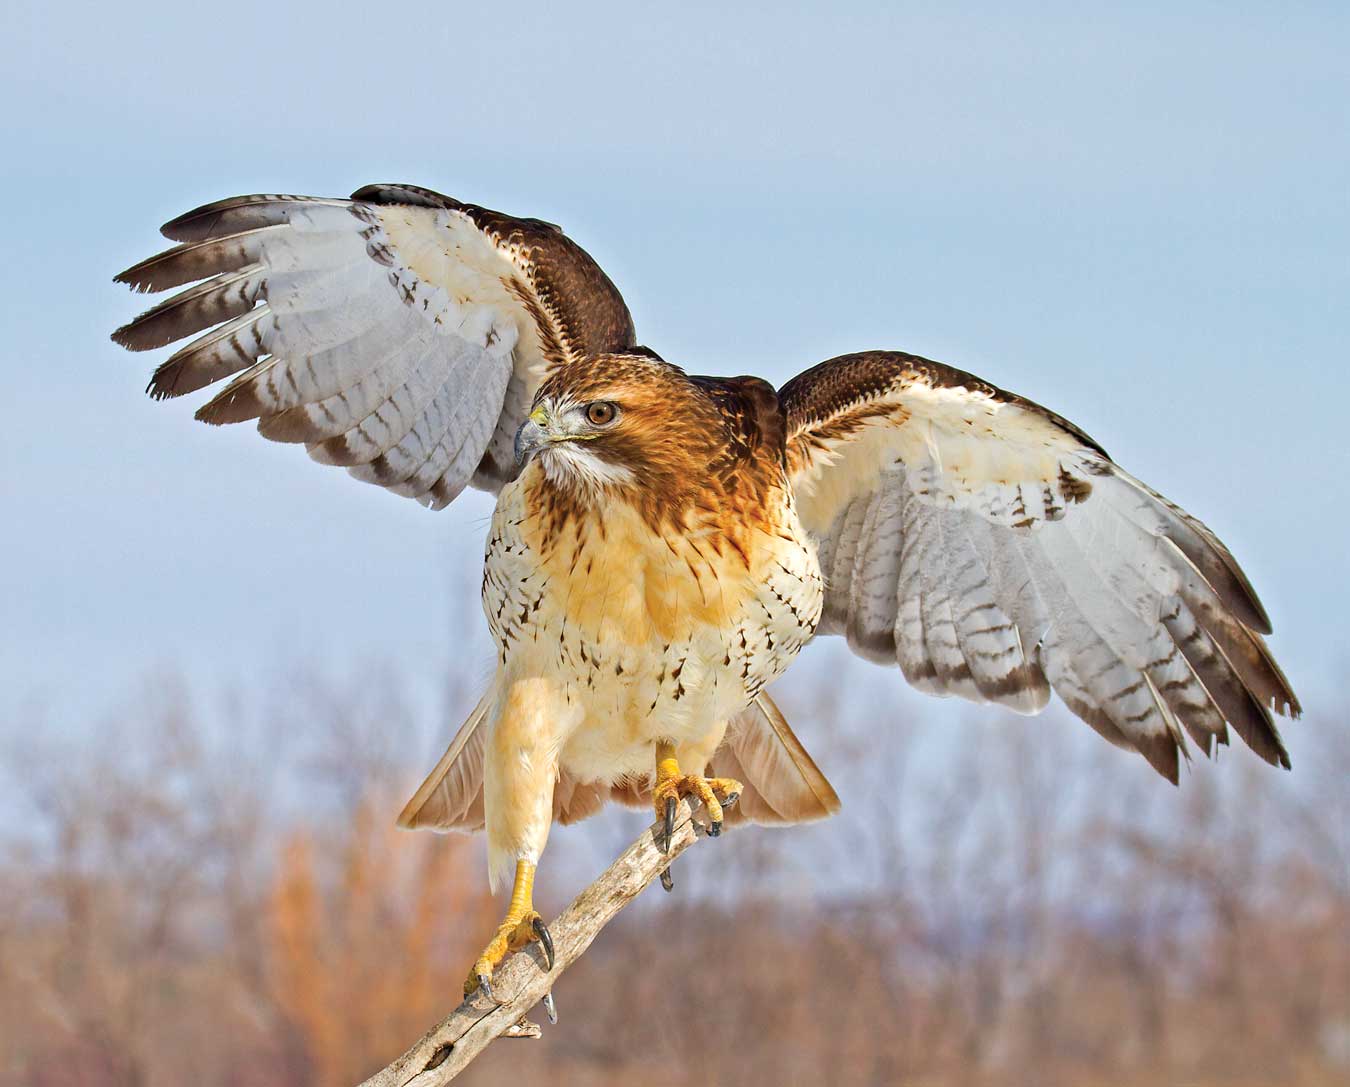 Largest hawk in Georgia. Distinctive “scream” often used by media as a Bald Eagle’s call. See them On the Wildlife Walk. Female: Arrived in 2005 after she was shot. Female: Arrived in 2018 after being hit by a car and losing an eye. Annual food cost: $1400